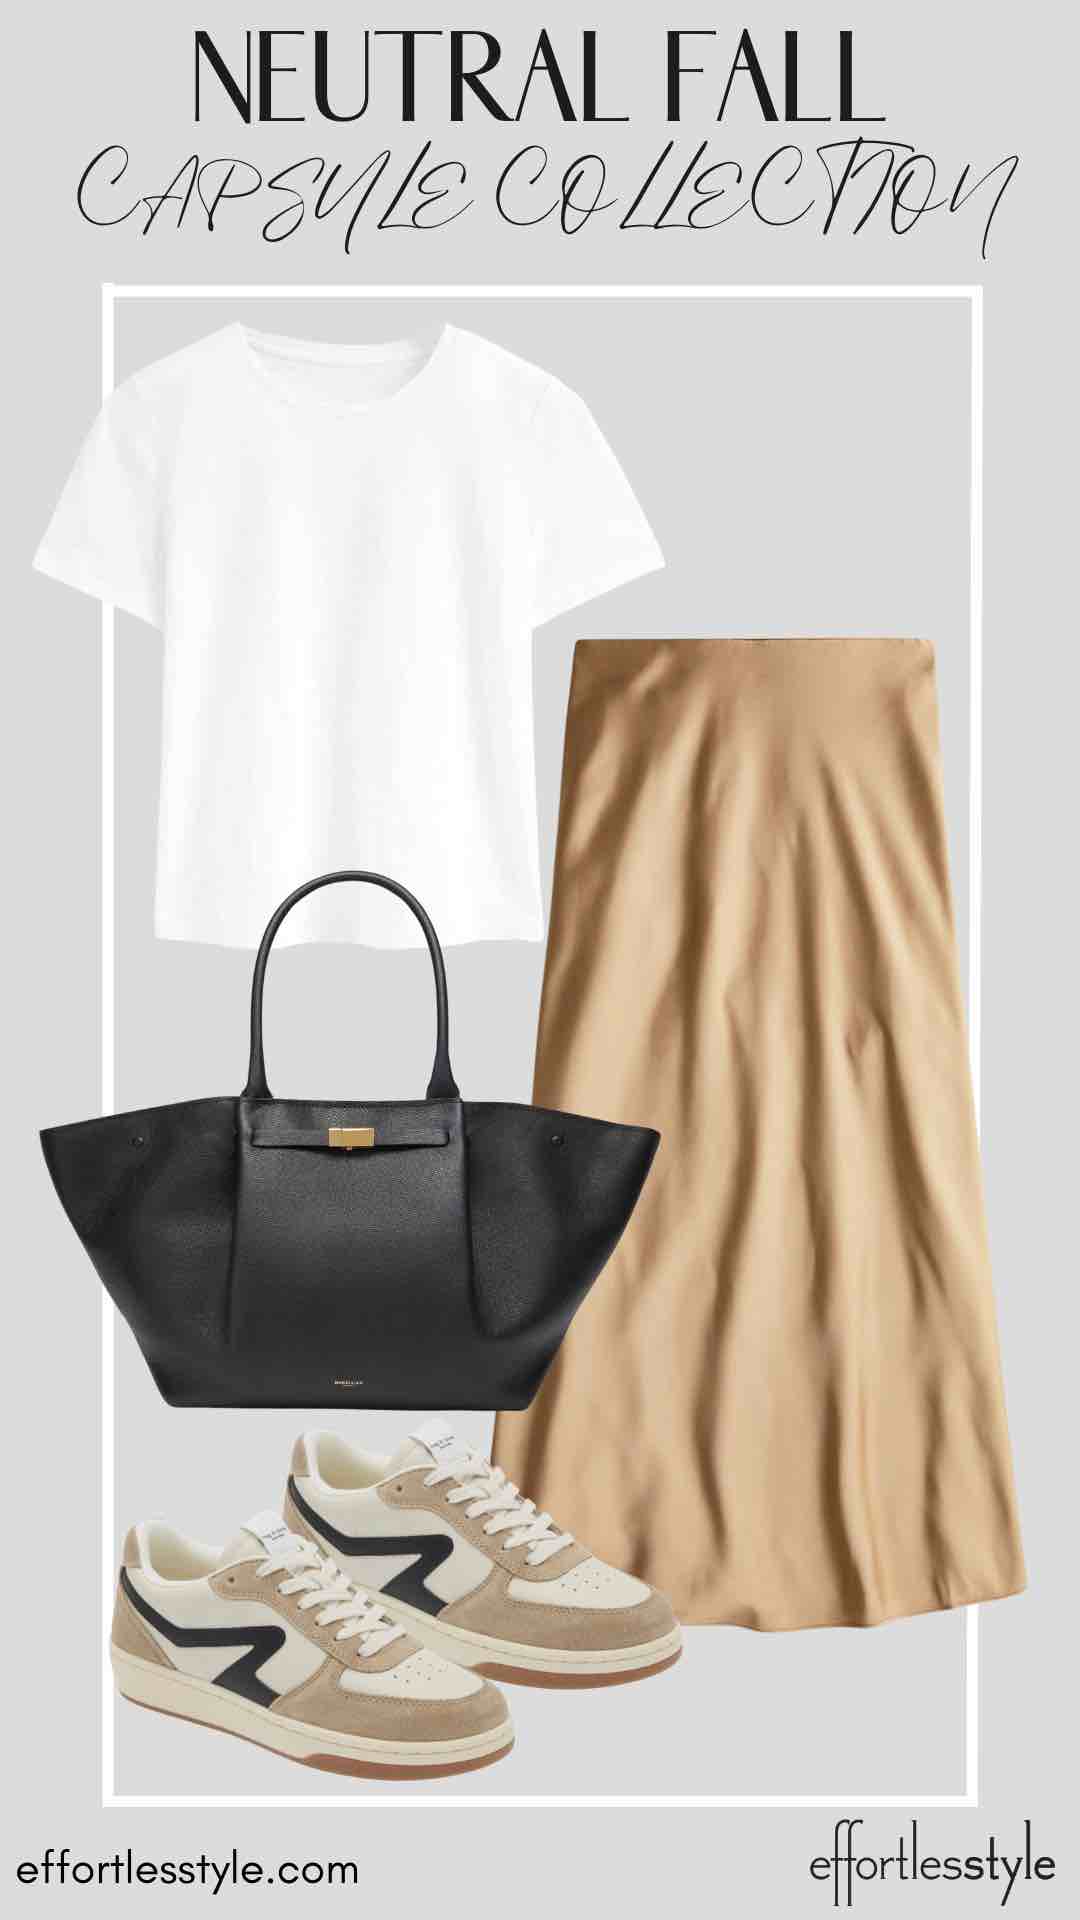 How To Wear Our Neutral Fall Capsule Wardrobe - Part 2 Short Sleeve Tee & Slip Skirt travel style inspo for fall how to wear sneakers with a slip skirt how to dress a slip skirt down fun casual looks with a slip skirt the best sneakers for fall the best neutral sneakers how to wear a tee shirt with a slip skirt